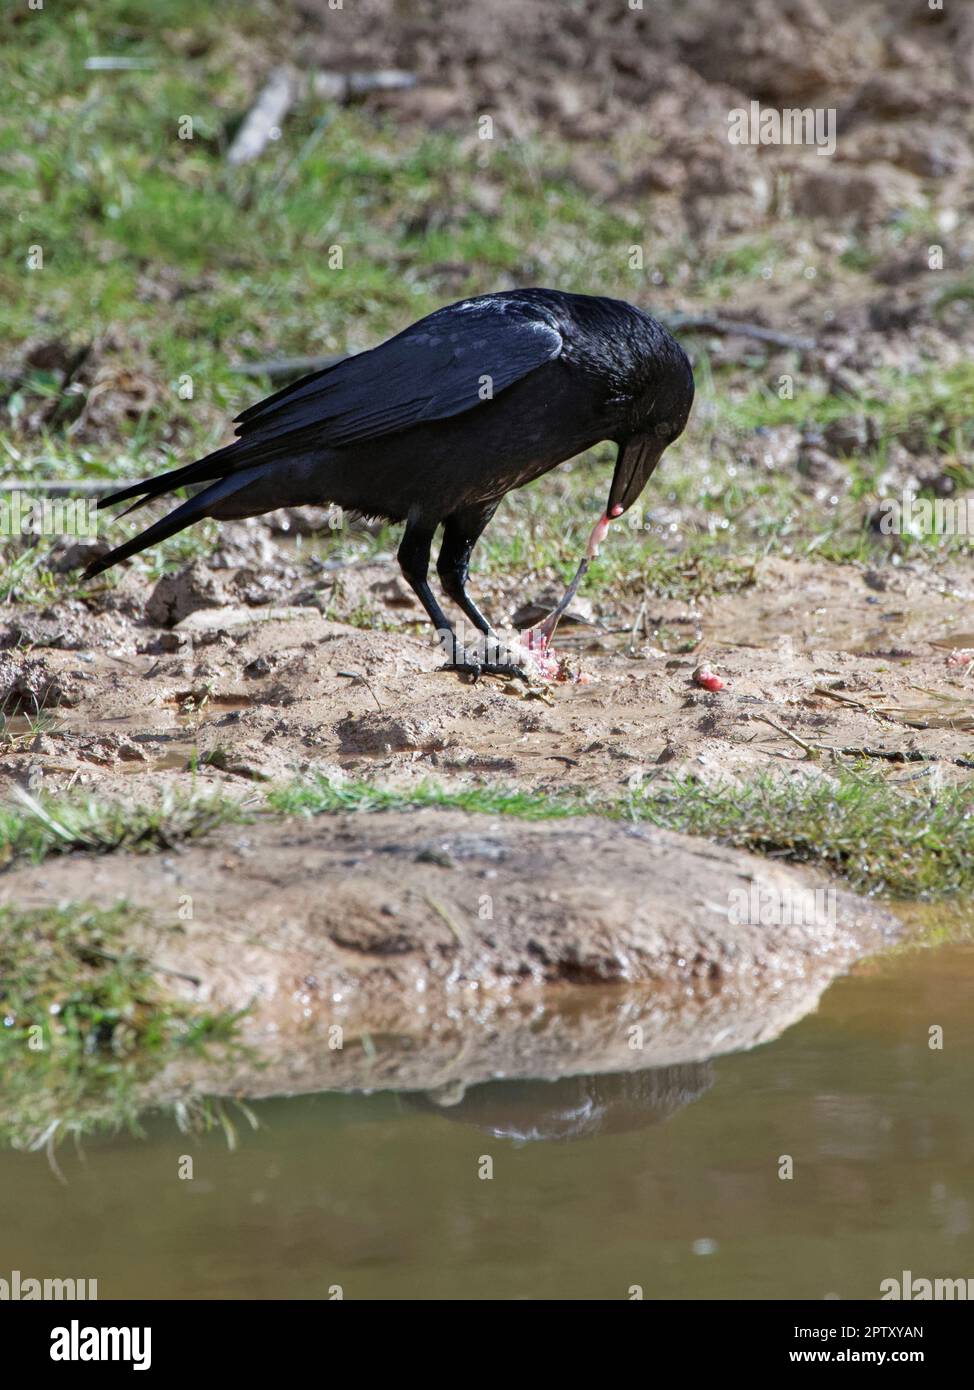 Carrion crow (Corvus corone) pulling away the back leg of a European toad (Bufo bufo) it has caught, leaving the toxic skin behind, Forest of Dean, UK Stock Photo